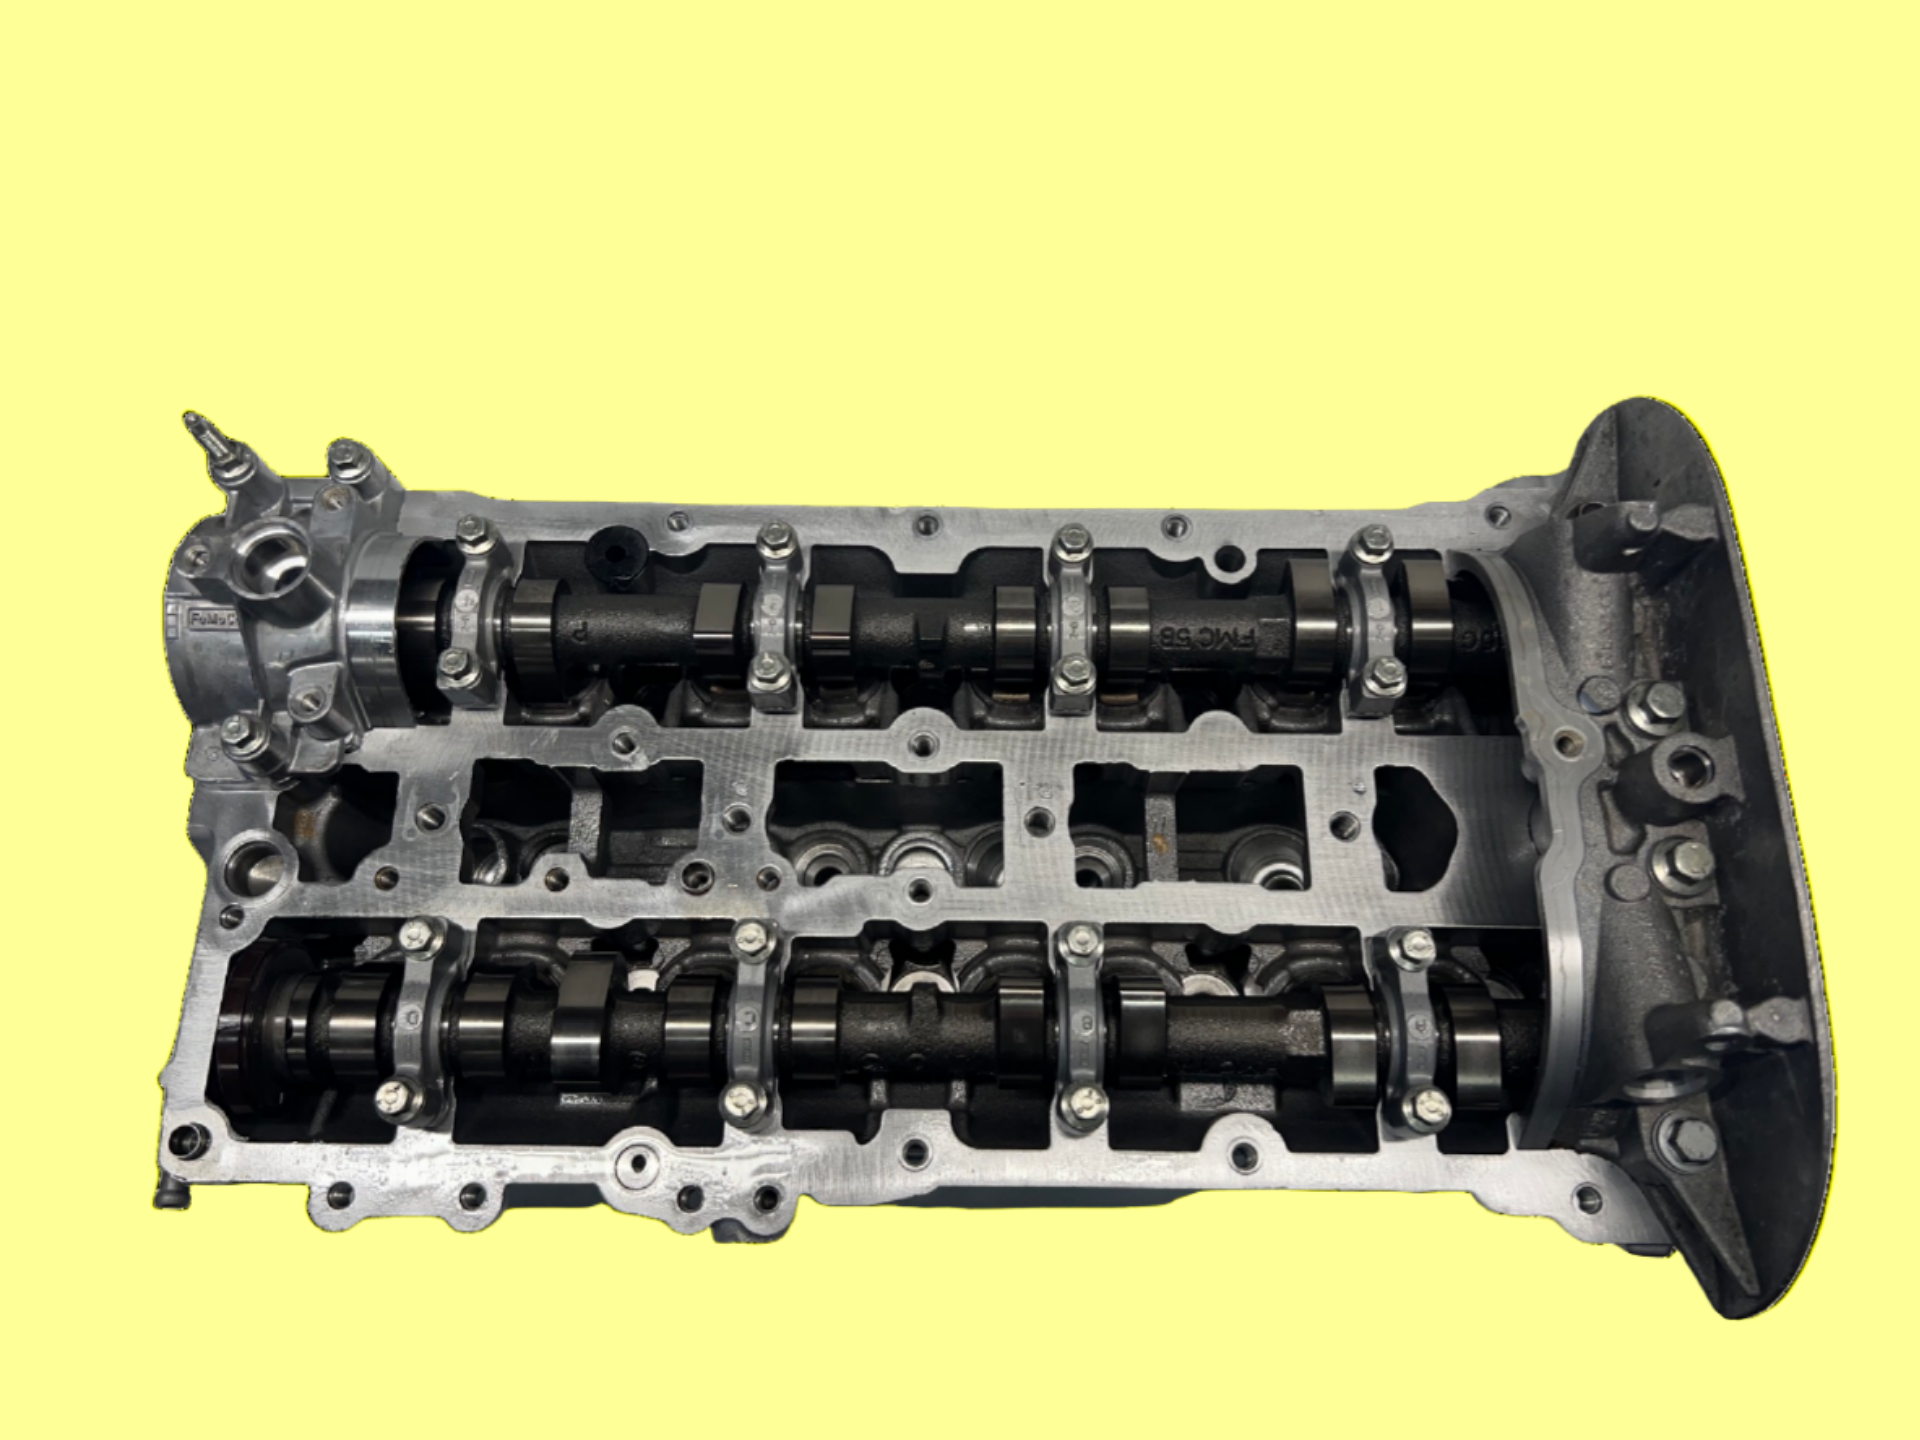 Top view of cylinder head for a Ford Fiesta 1.6L Casting #RFBM5G